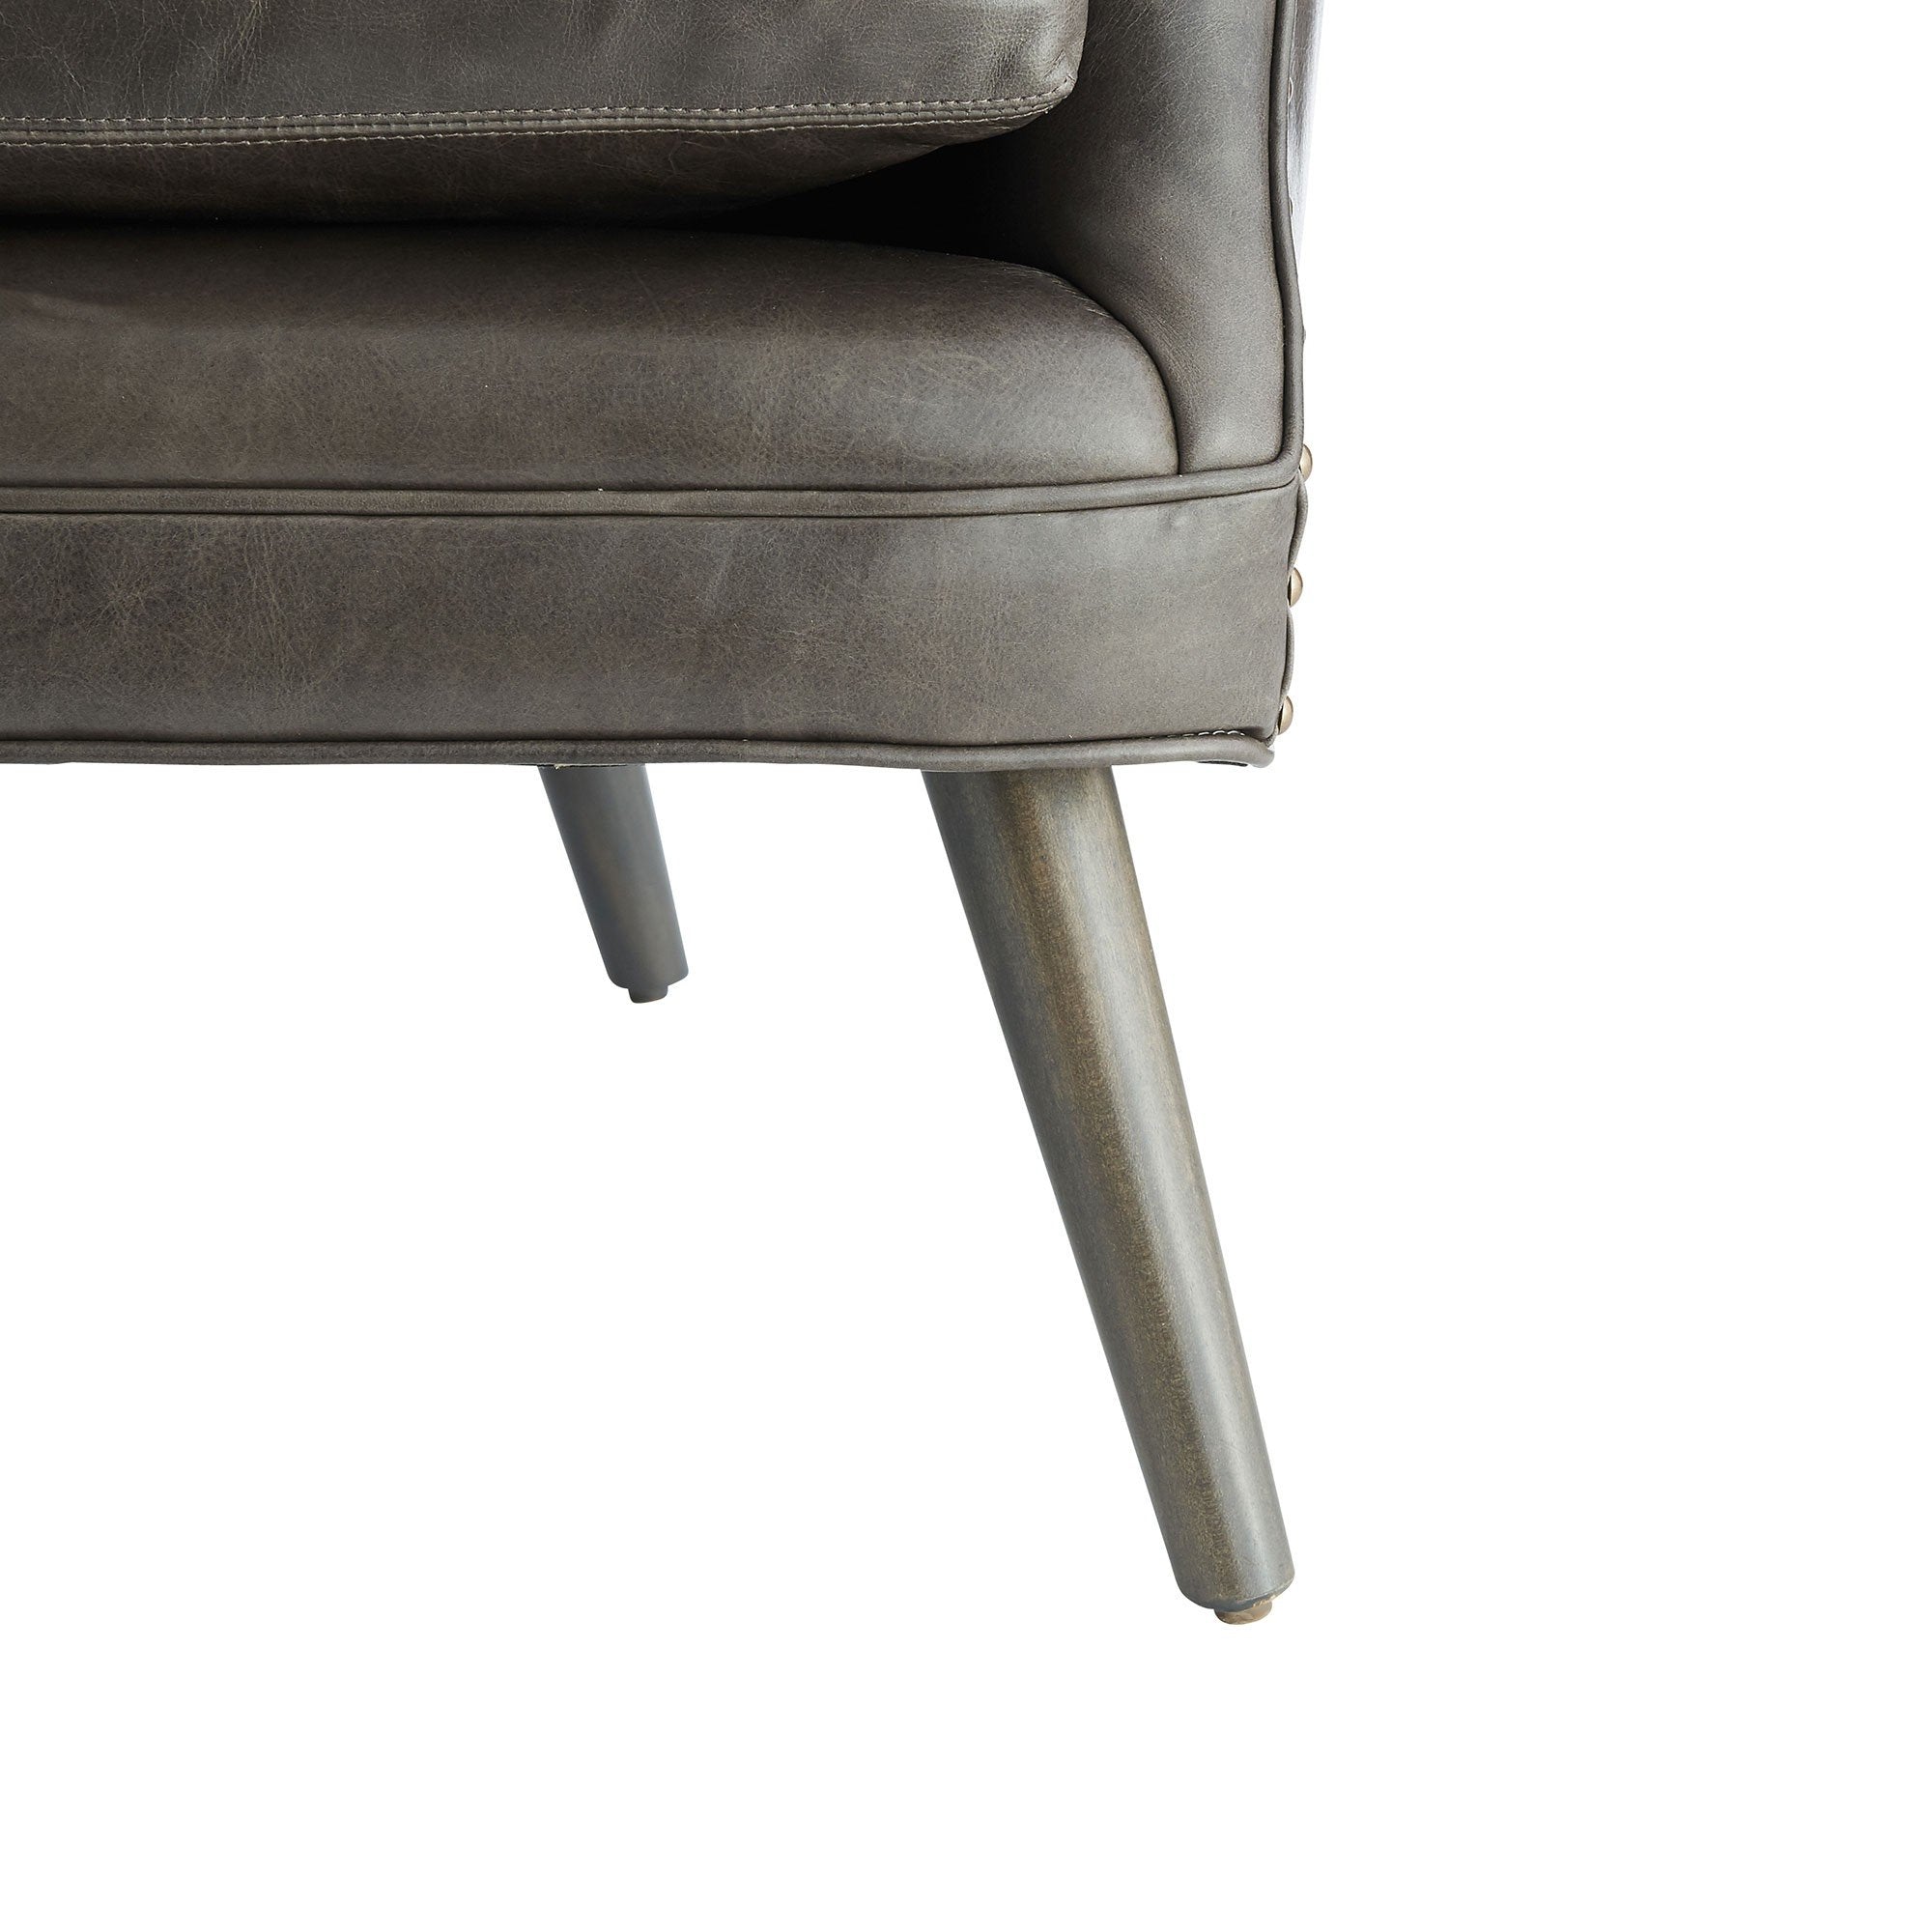 Seger Chair Graphite Leather Grey Ash